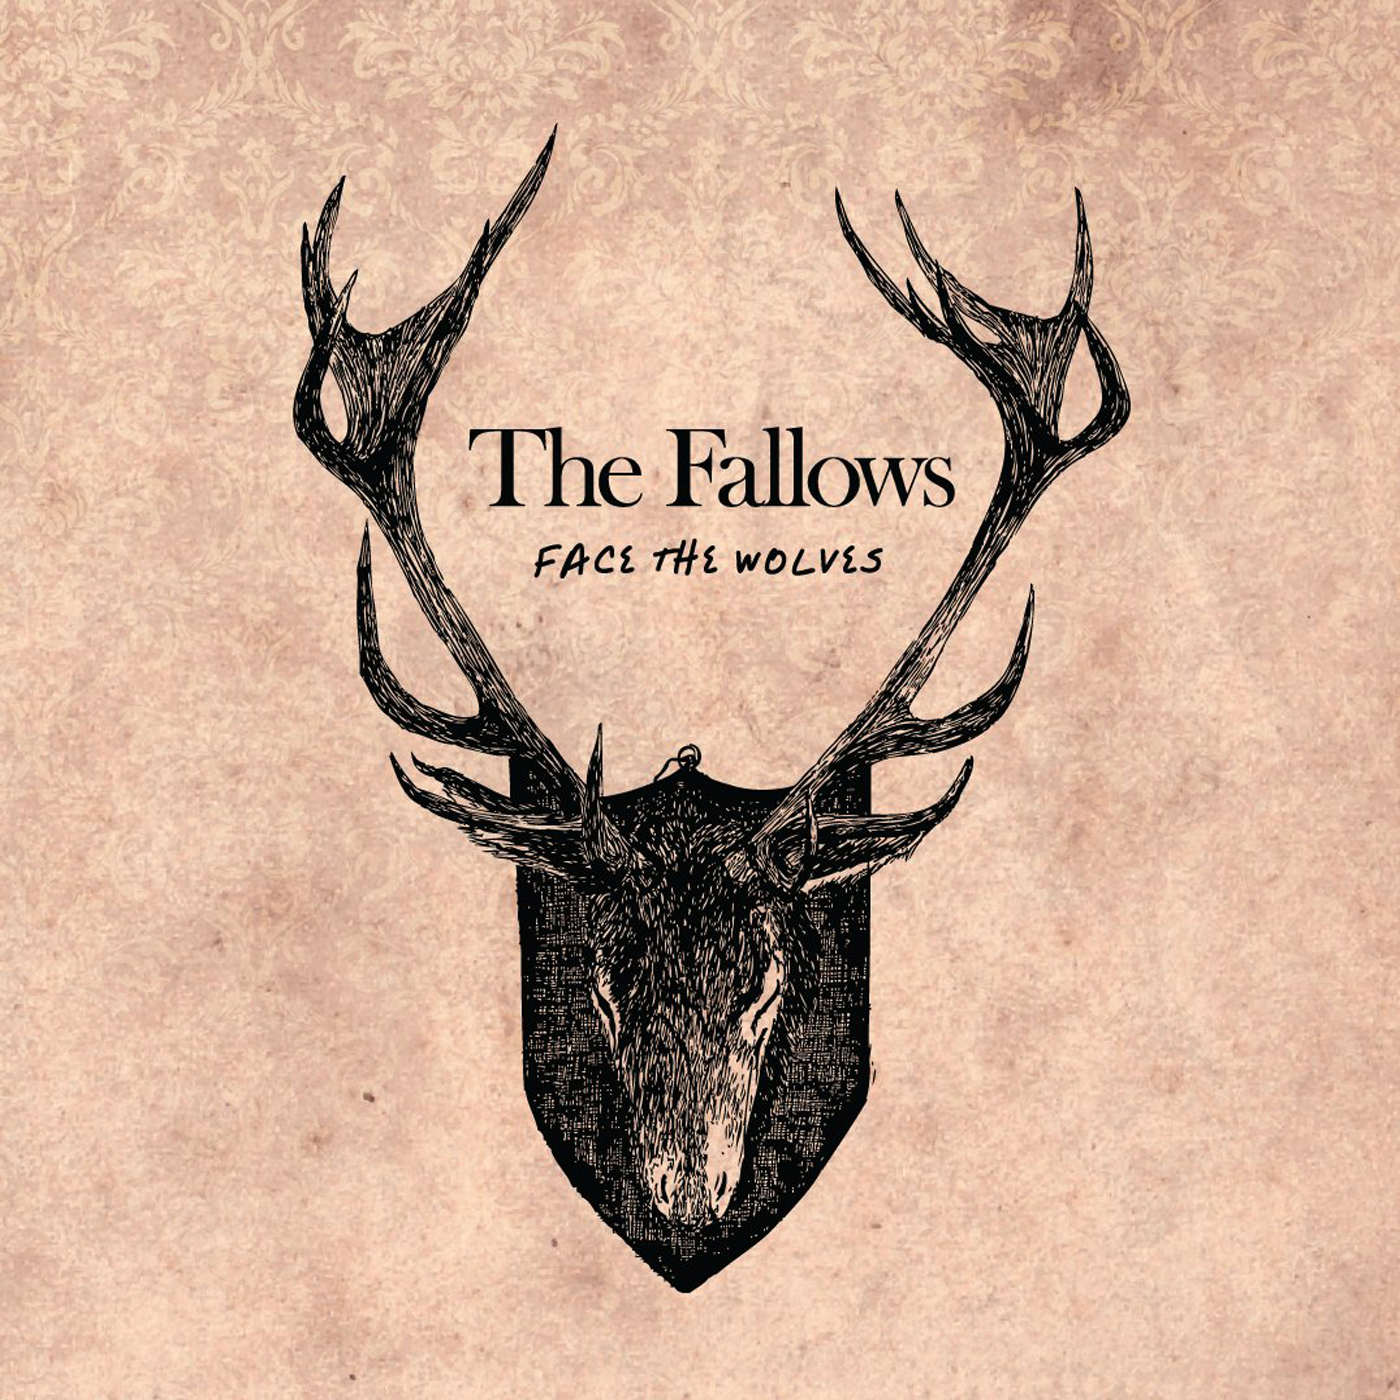 The Fallows To Release Debut Album